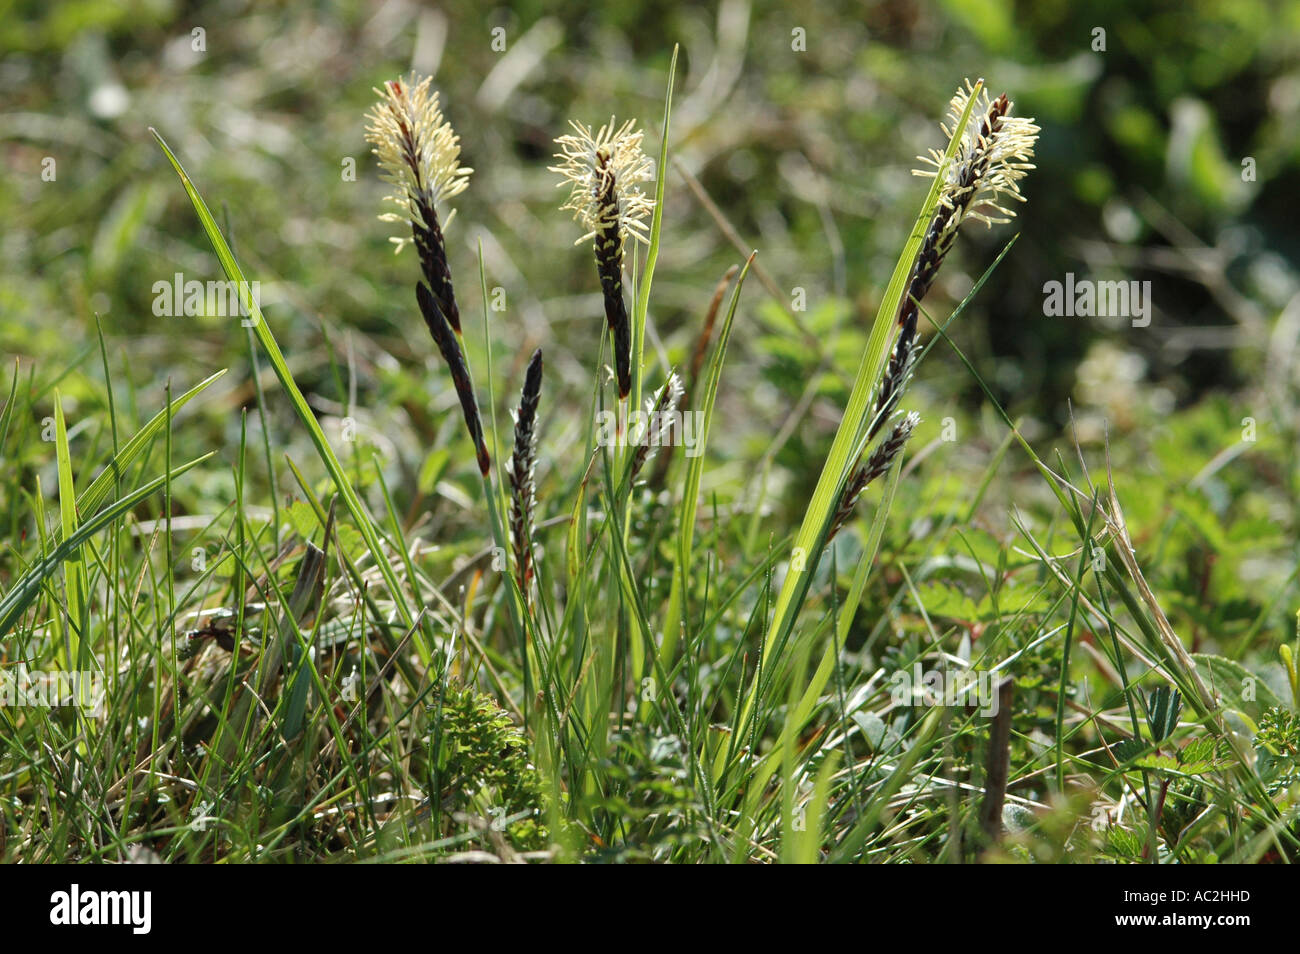 A Sedge flowering in detail Stock Photo